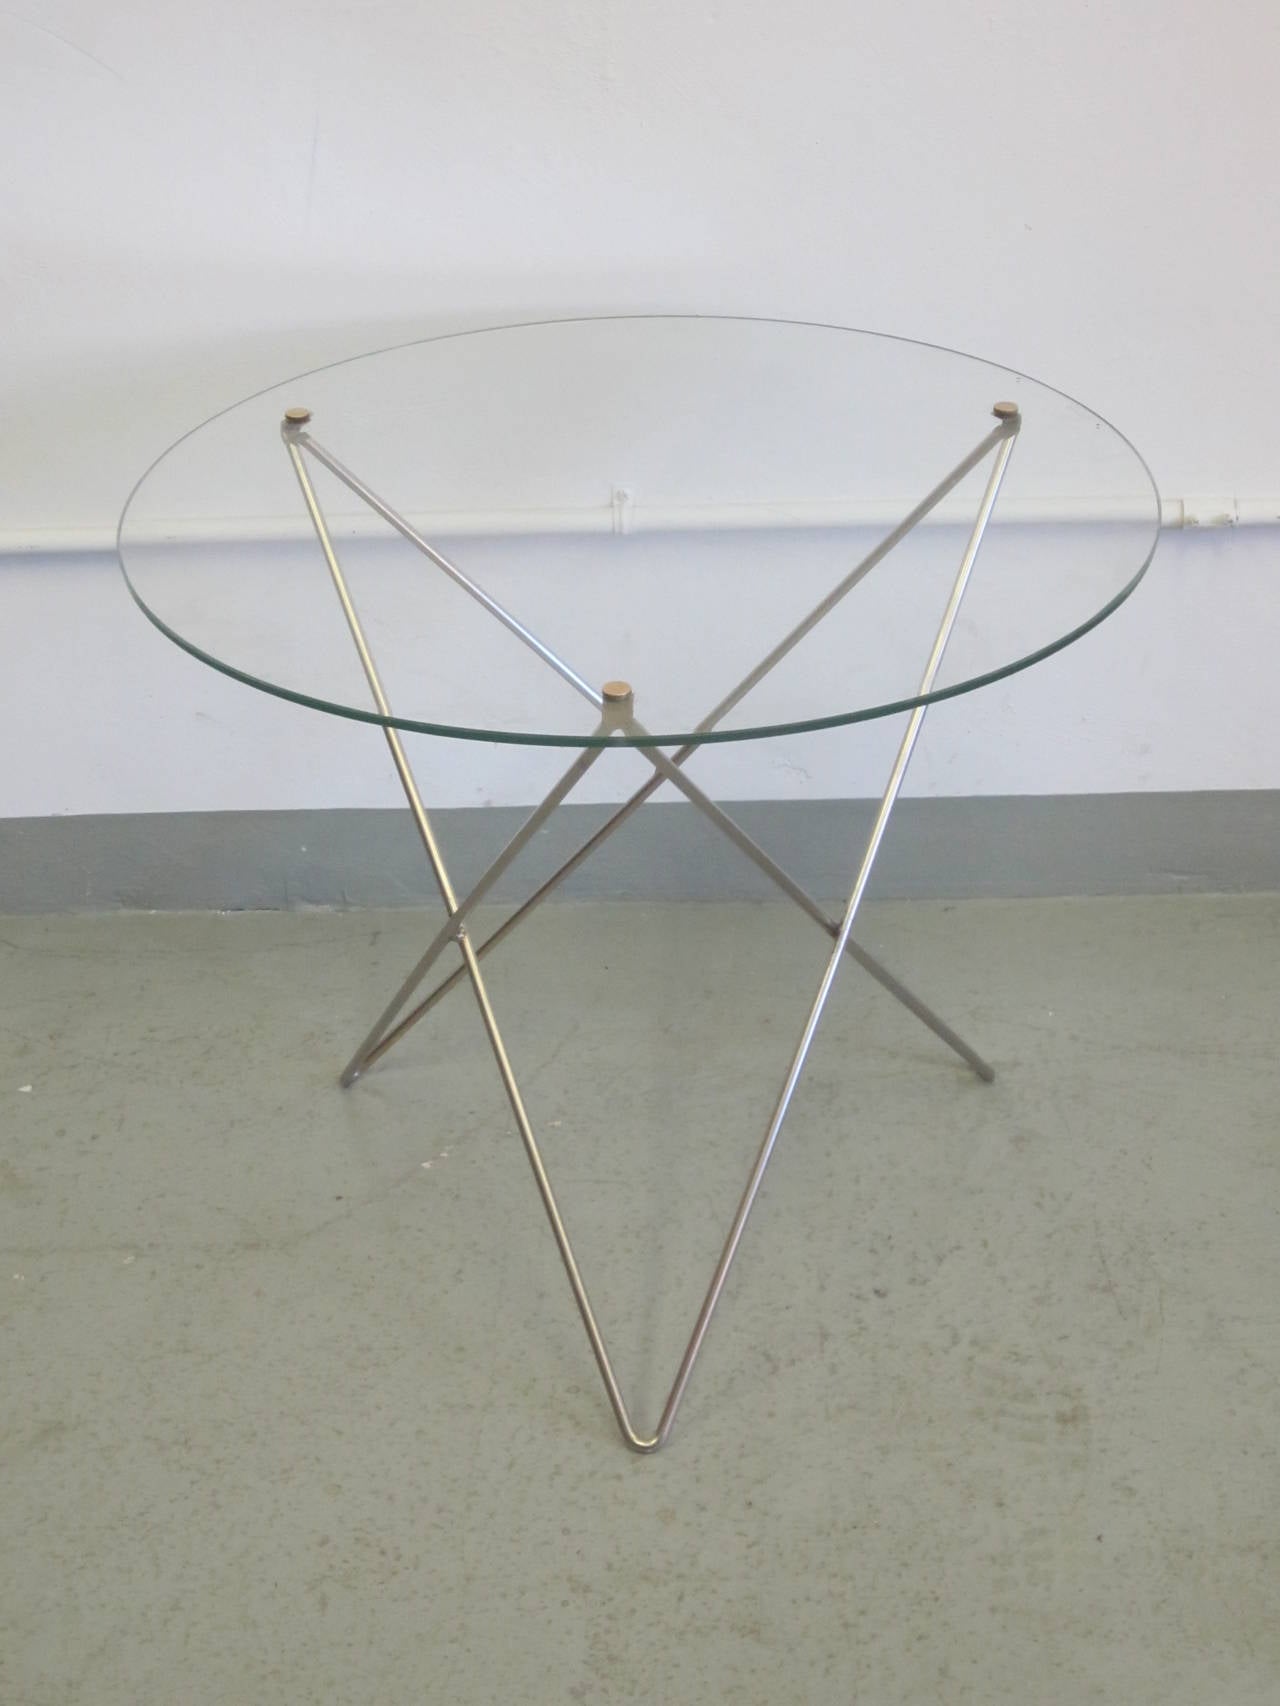 French Italian Midcentury Stainless Steel and Glass Side Tables, Carlo Paccagnini, Pair For Sale